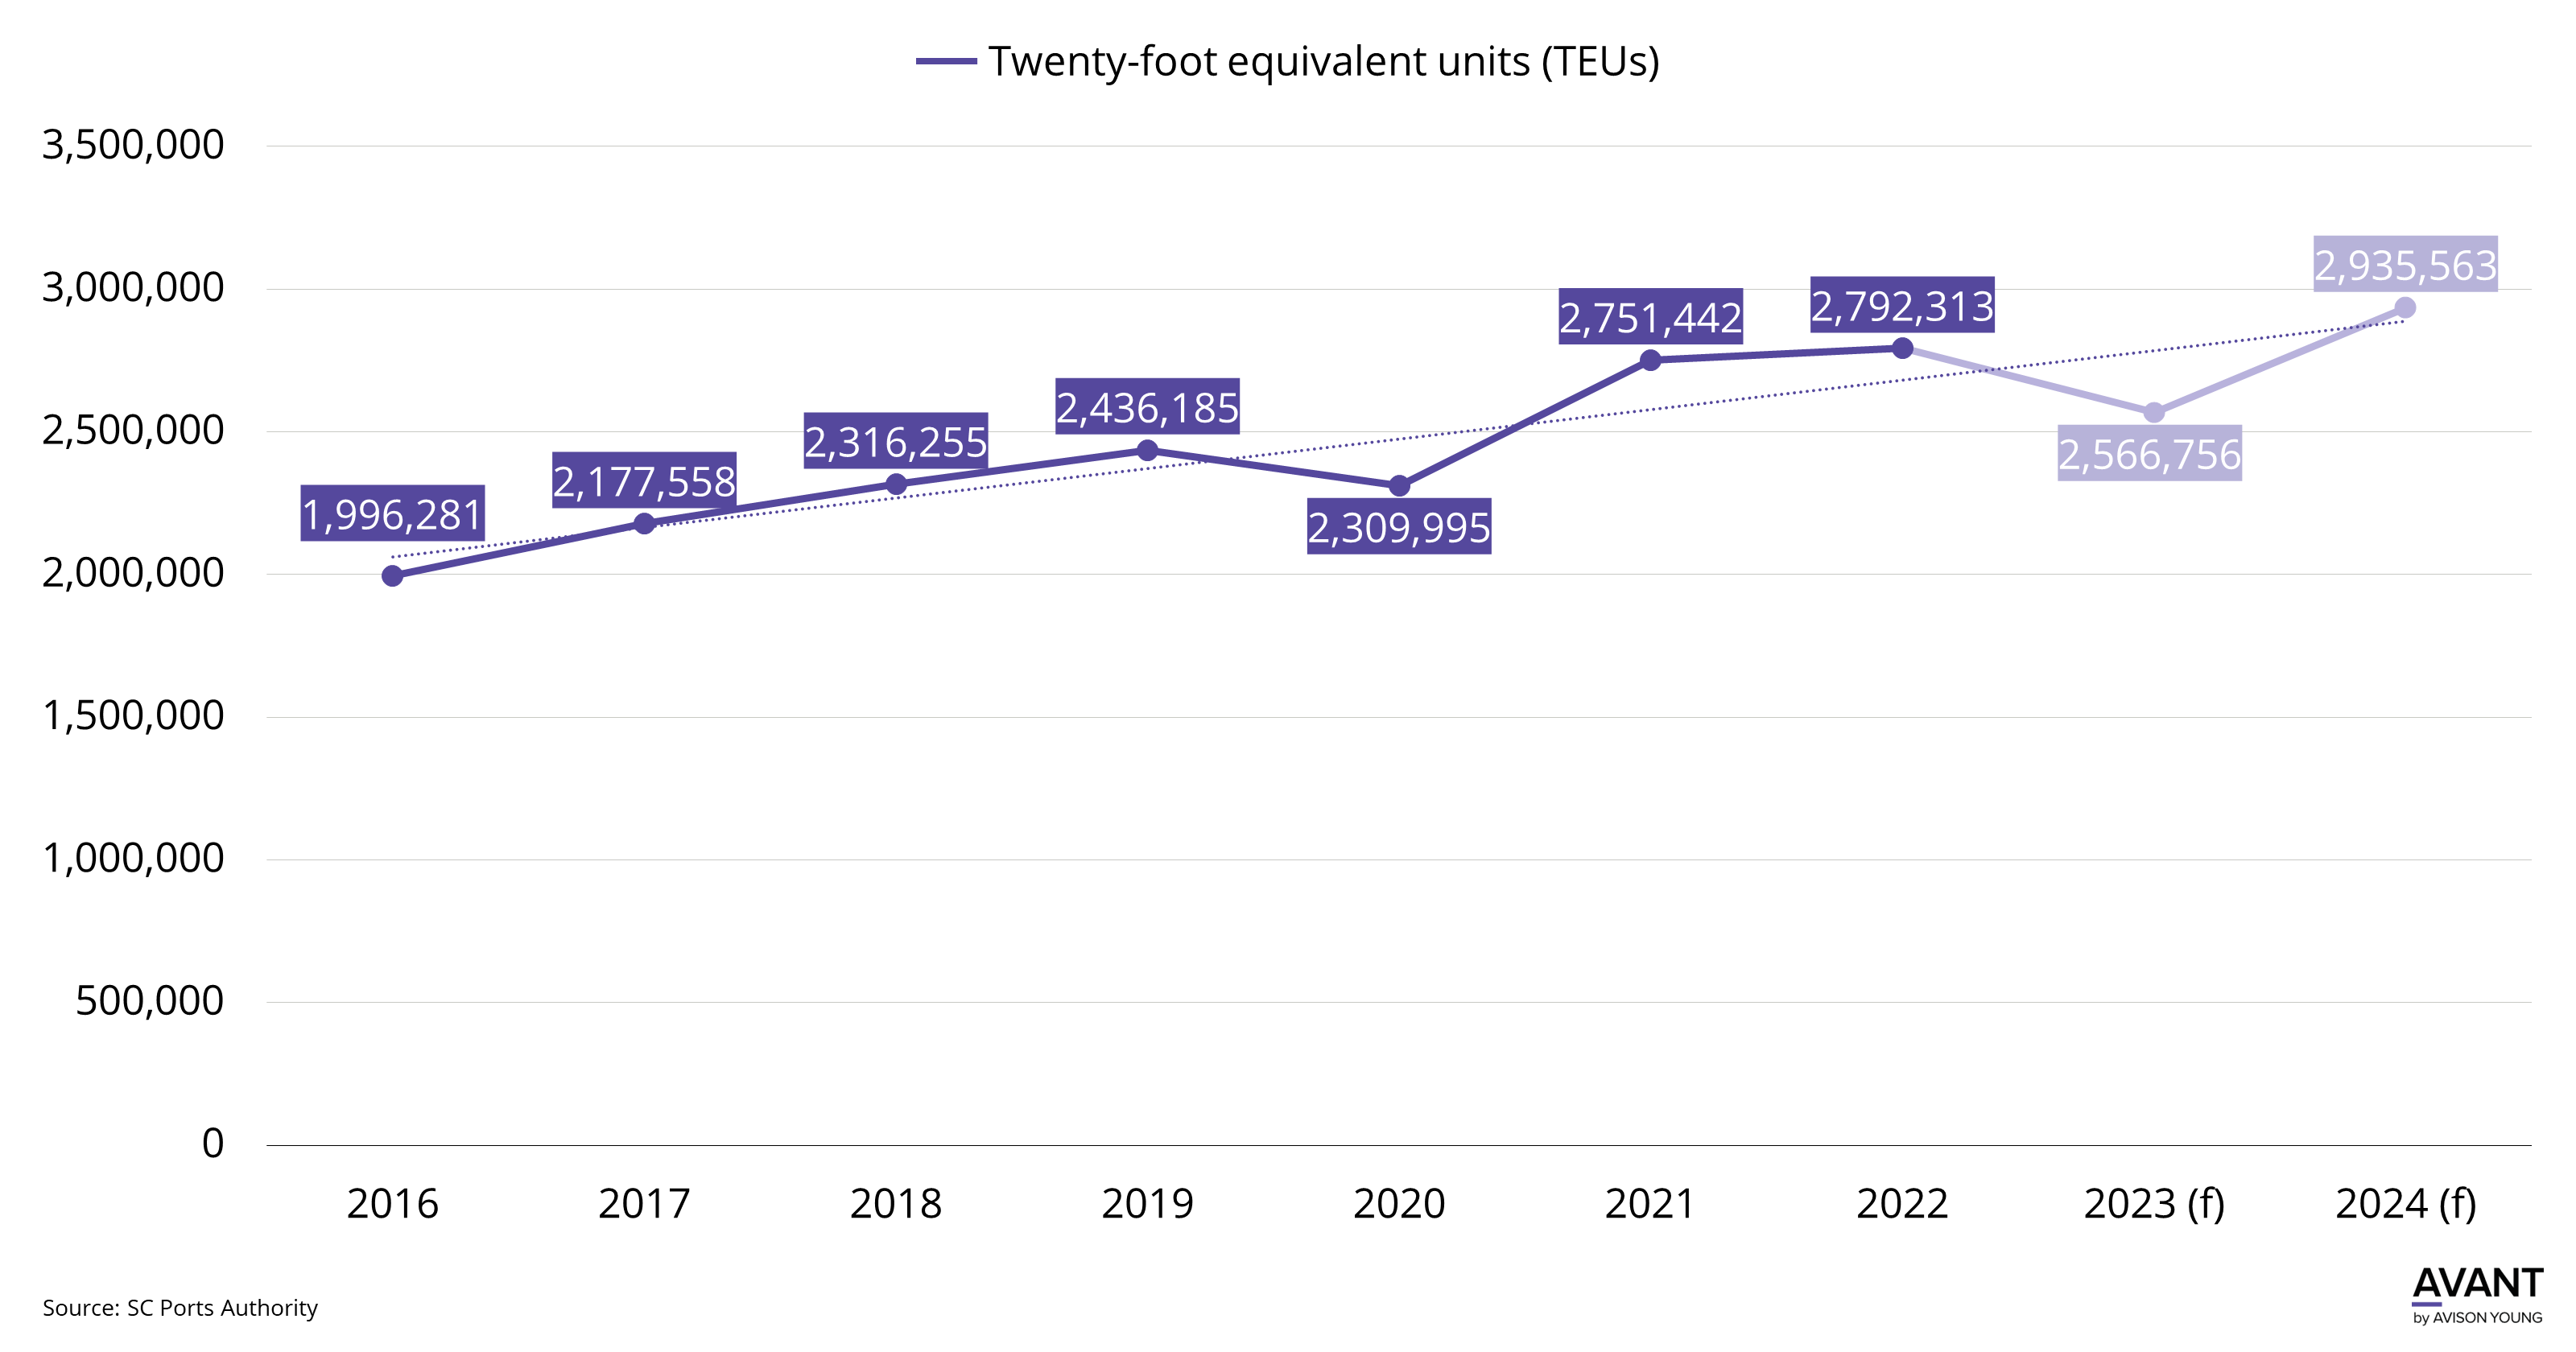 graph of number of twenty-foot equivalent units (TEUs) that move through South Carolina ports from 2016 to 2022 with anticipated 2023 and 2024 volume affecting Greenville's industrial market